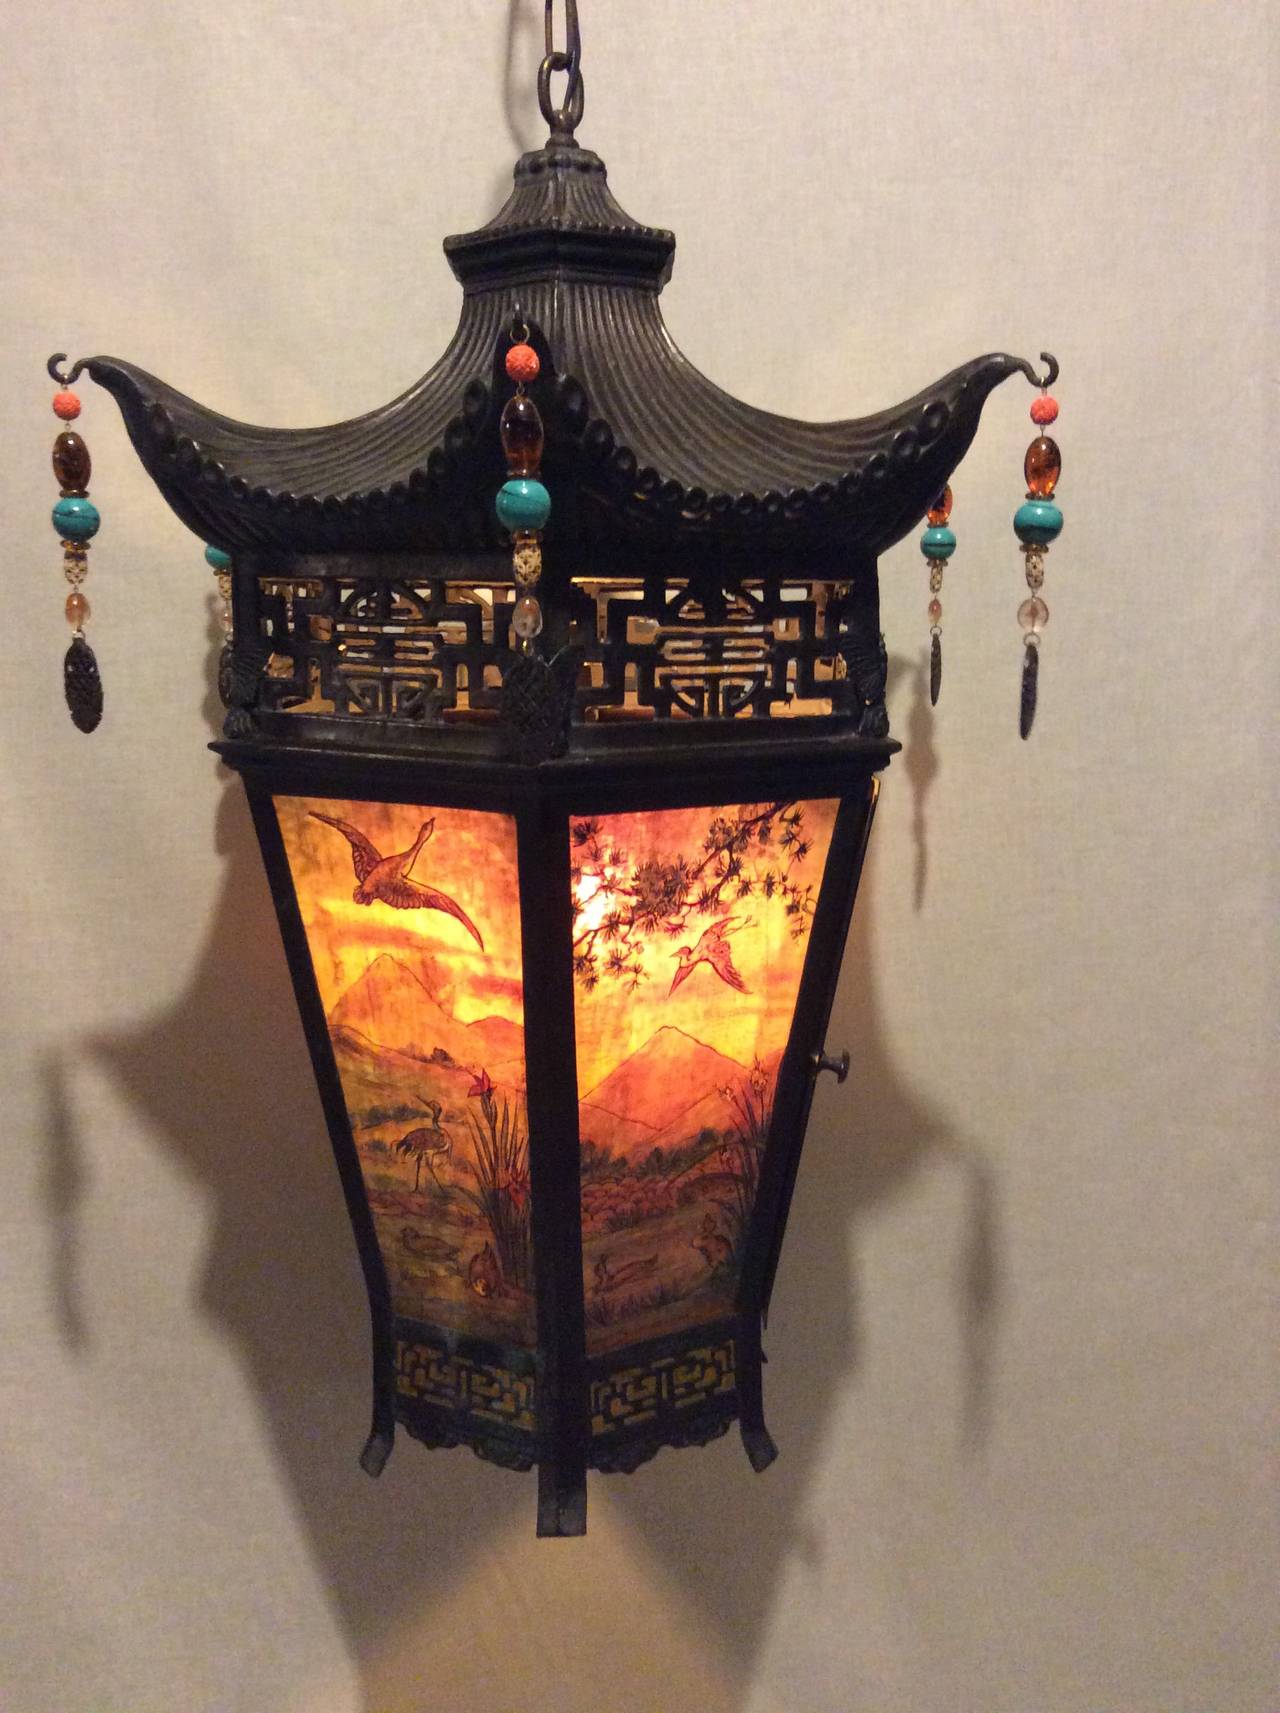 Arts & Crafts oriental style hanging lantern.
Scenic landscape painted and stained glass panels (six)
(similar to handle lamp shades) as features for this large, impressive lantern. Made of copper which has been pierce carved with oriental design